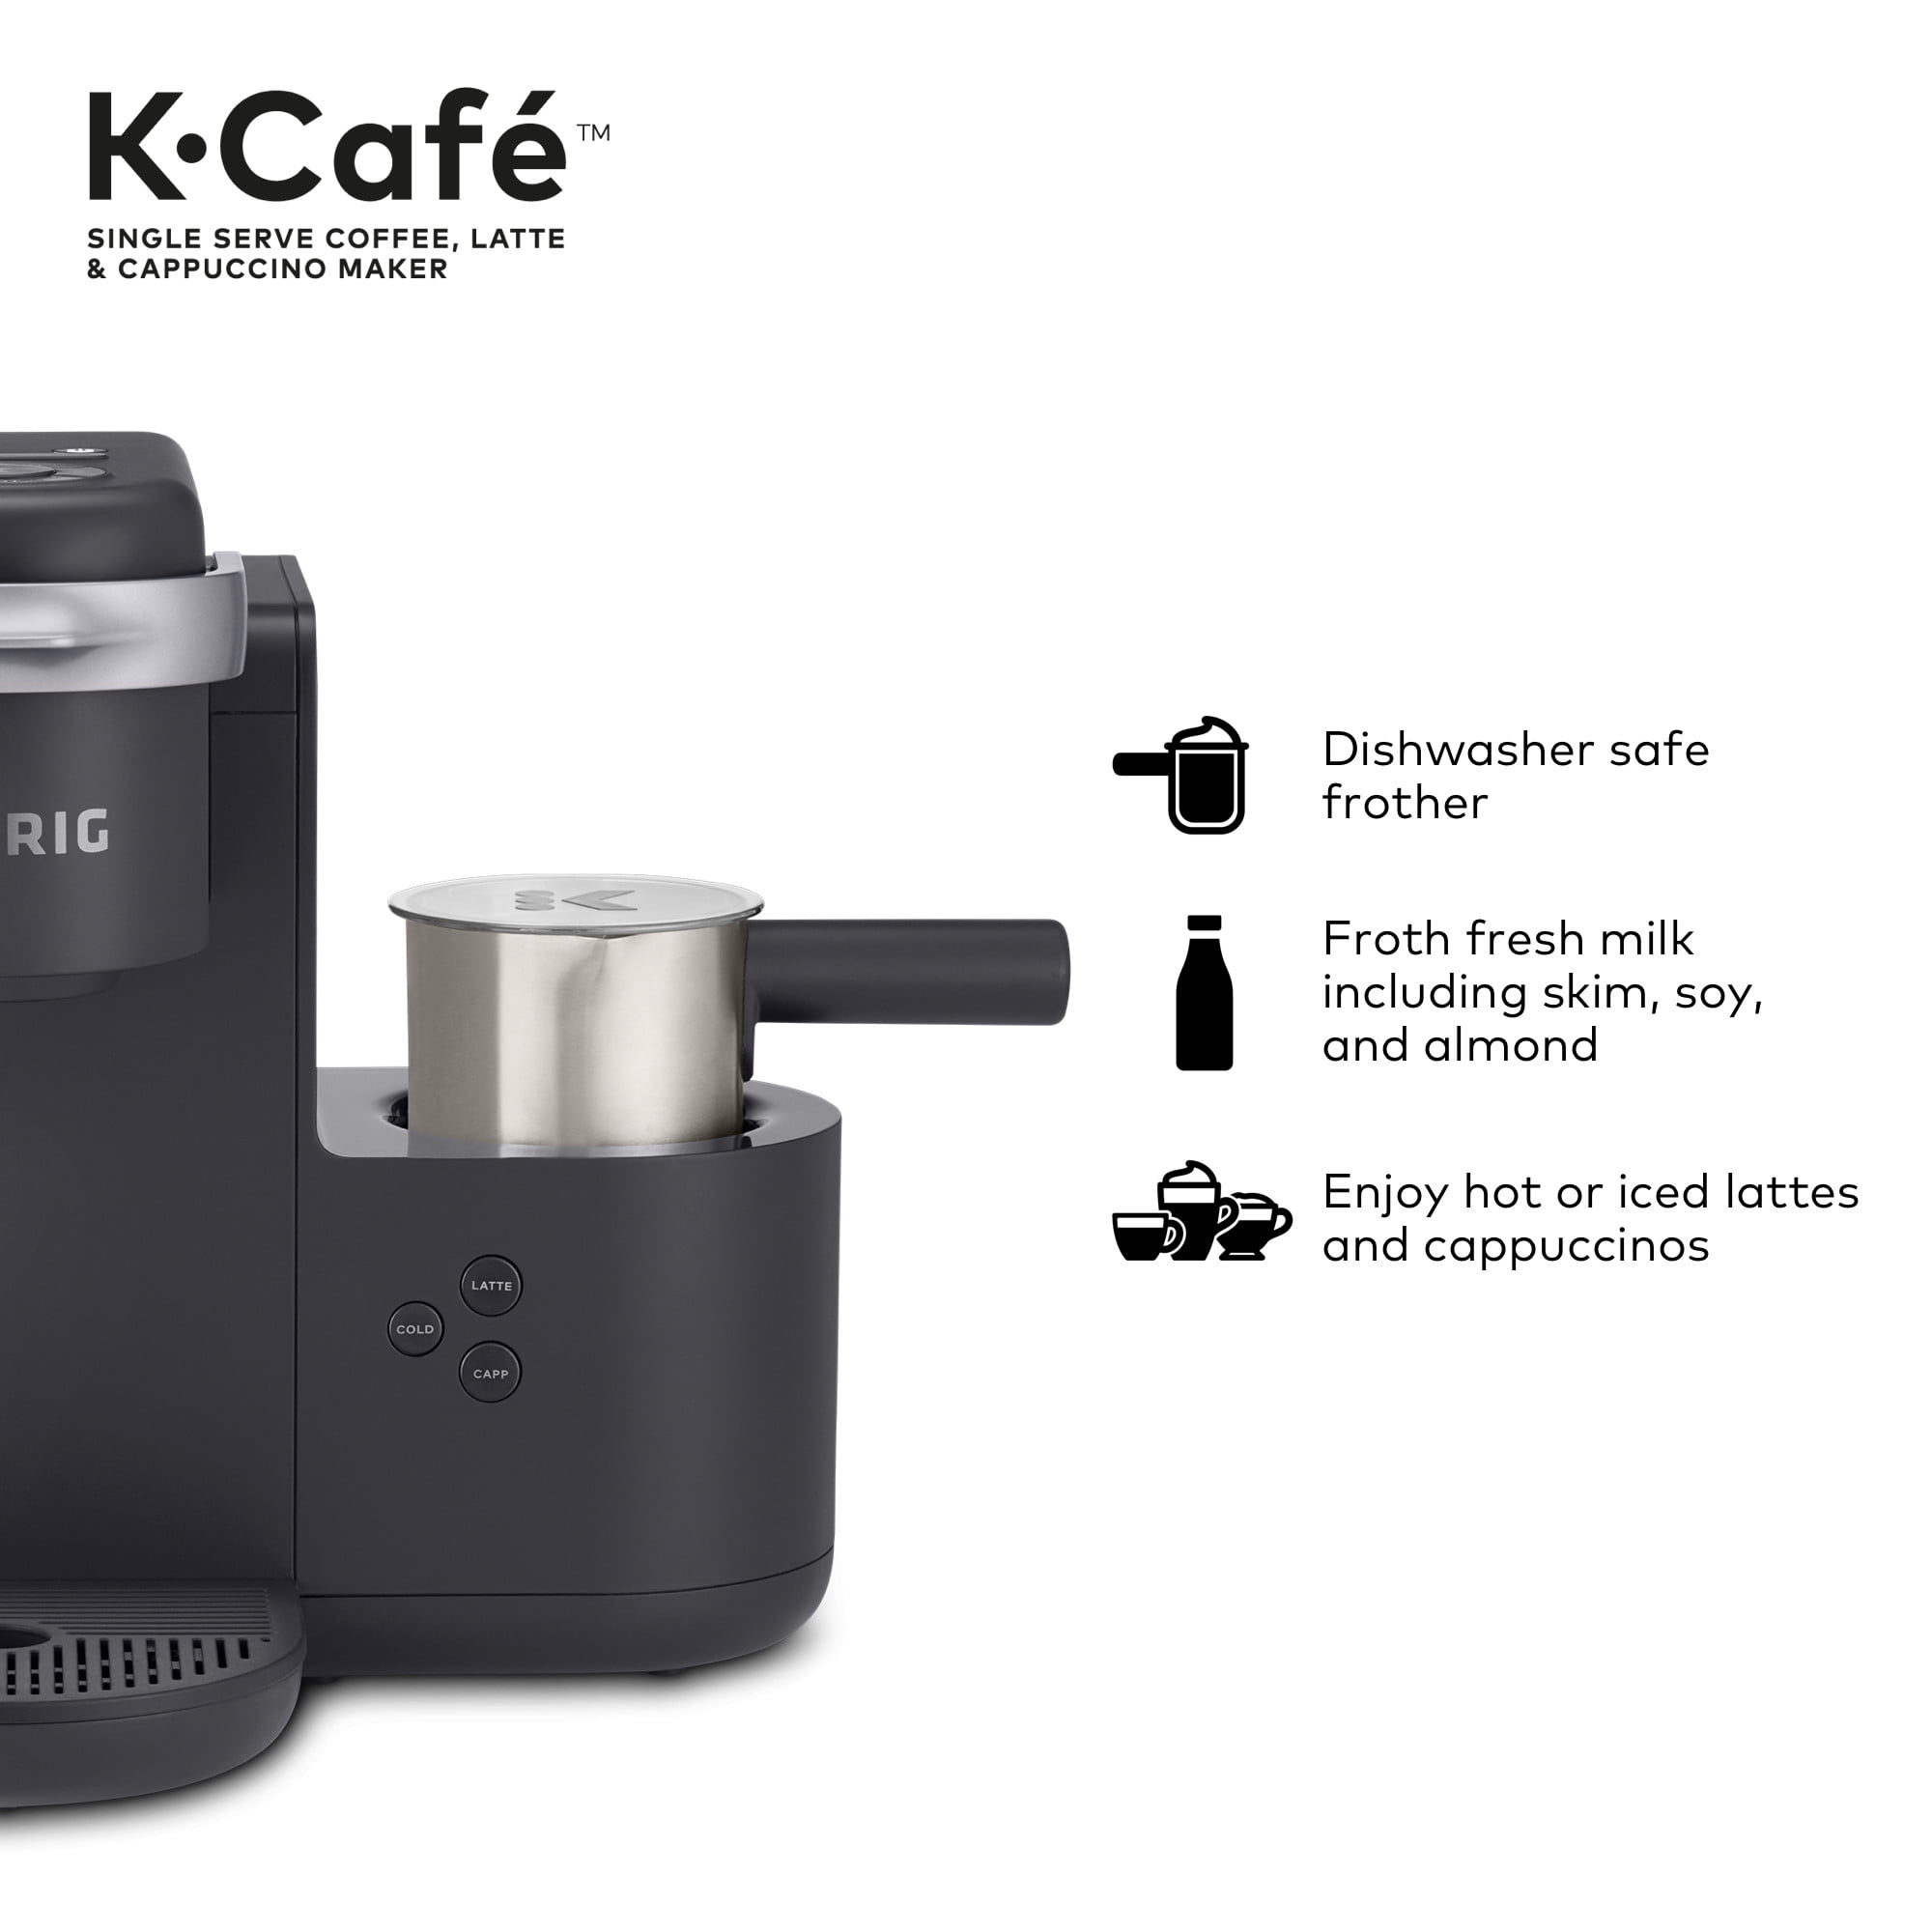 Keurig K-Café SMART Single Serve Coffee Maker with WiFi Compatibility,  Latte and Cappuccino Machine with Built-In Frother, 6 Brew Sizes, Works  with Alexa, Black –